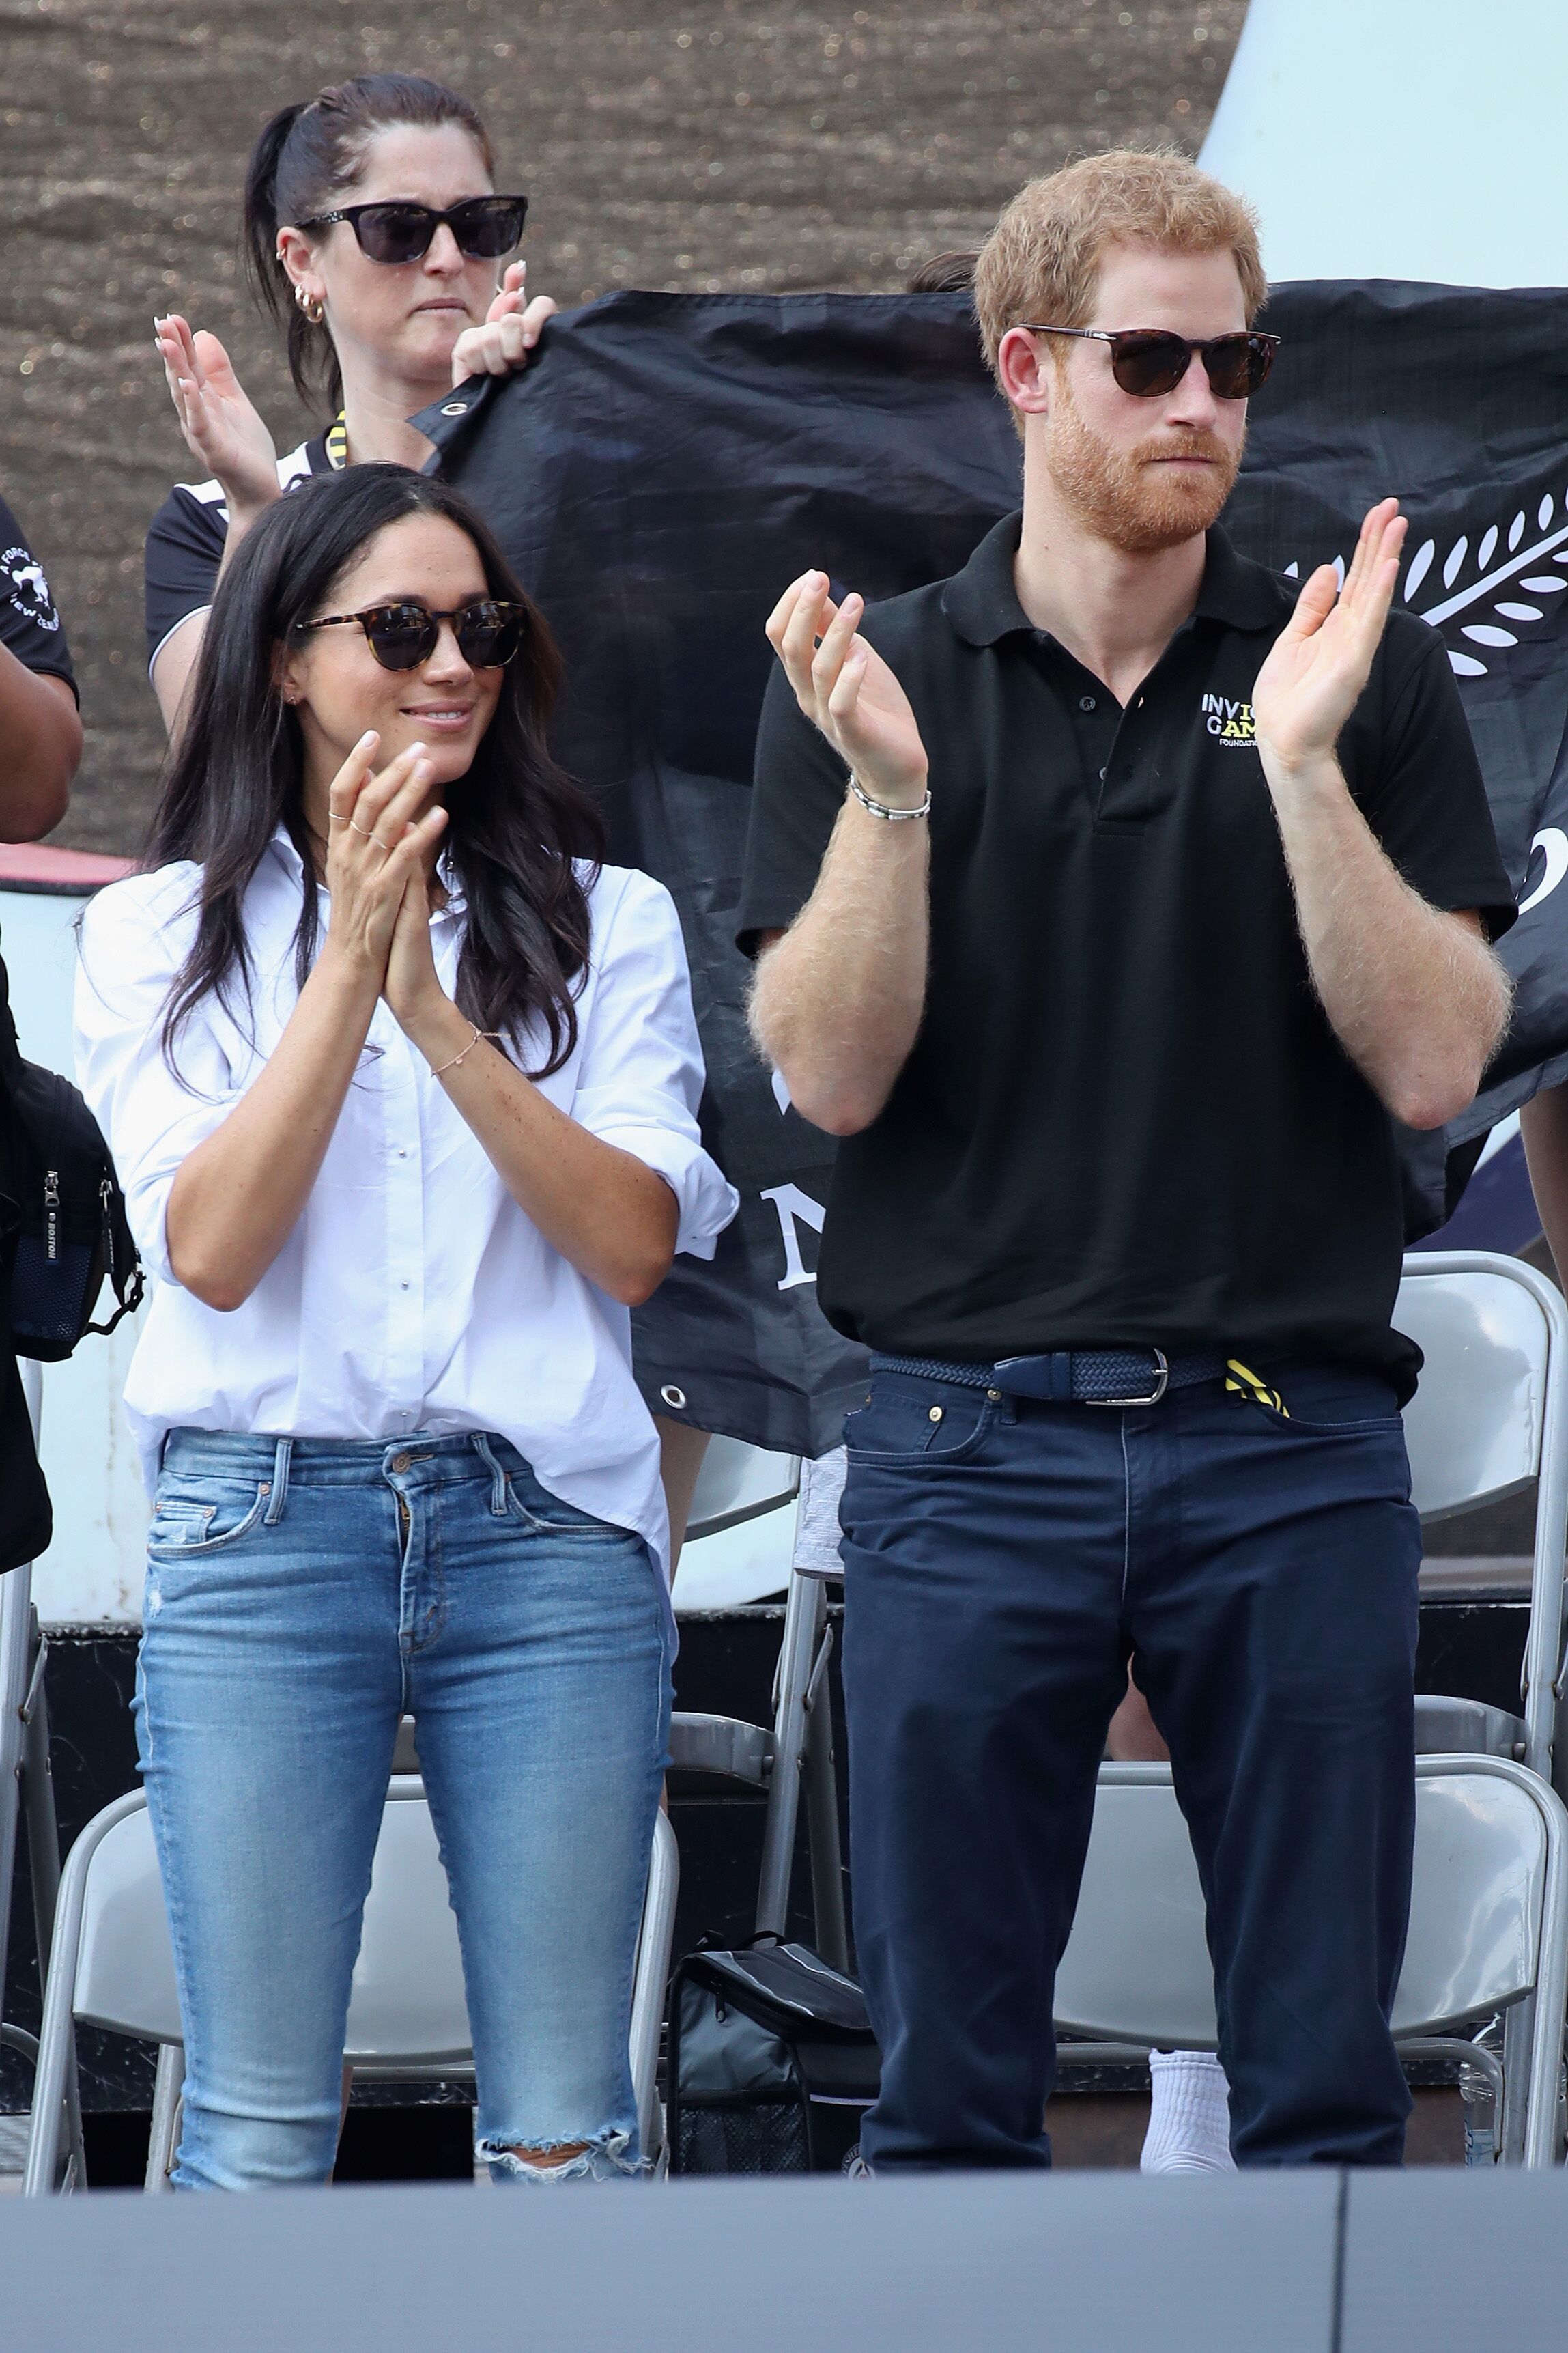 Duchess Meghan and Prince Harry at a Wheelchair Tennis match during the Invictus Games on September 25, 2017, in Toronto, Canada | Photo: Getty Images 